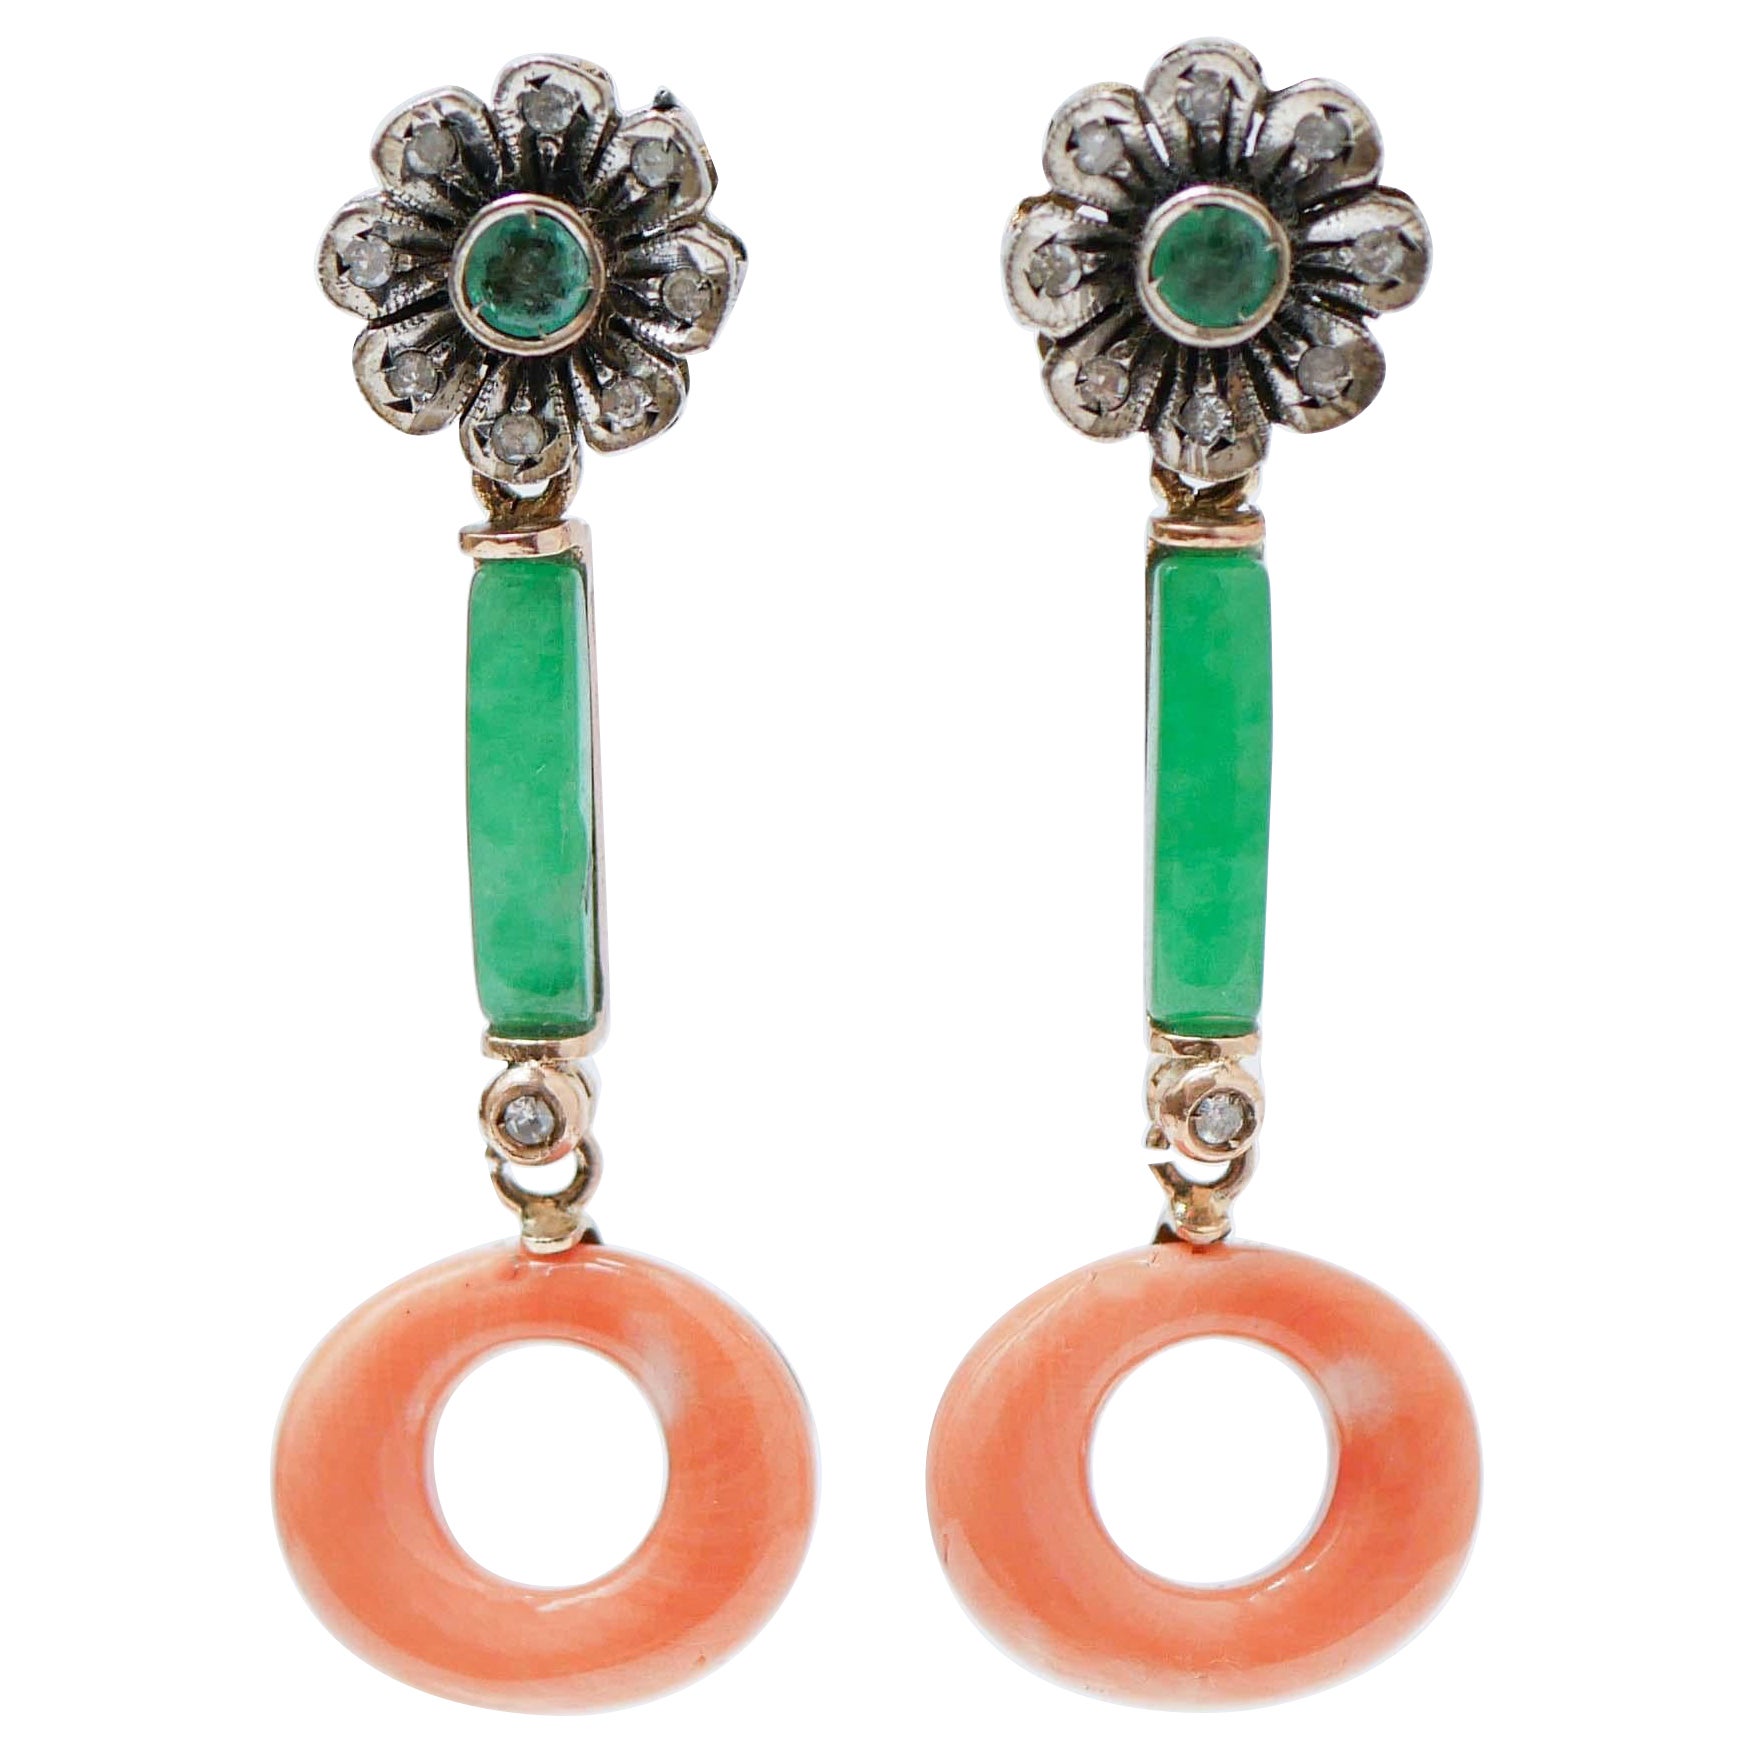 Coral, Diamonds, Emeralds, Jade, Rose Gold and Silver Earrings.